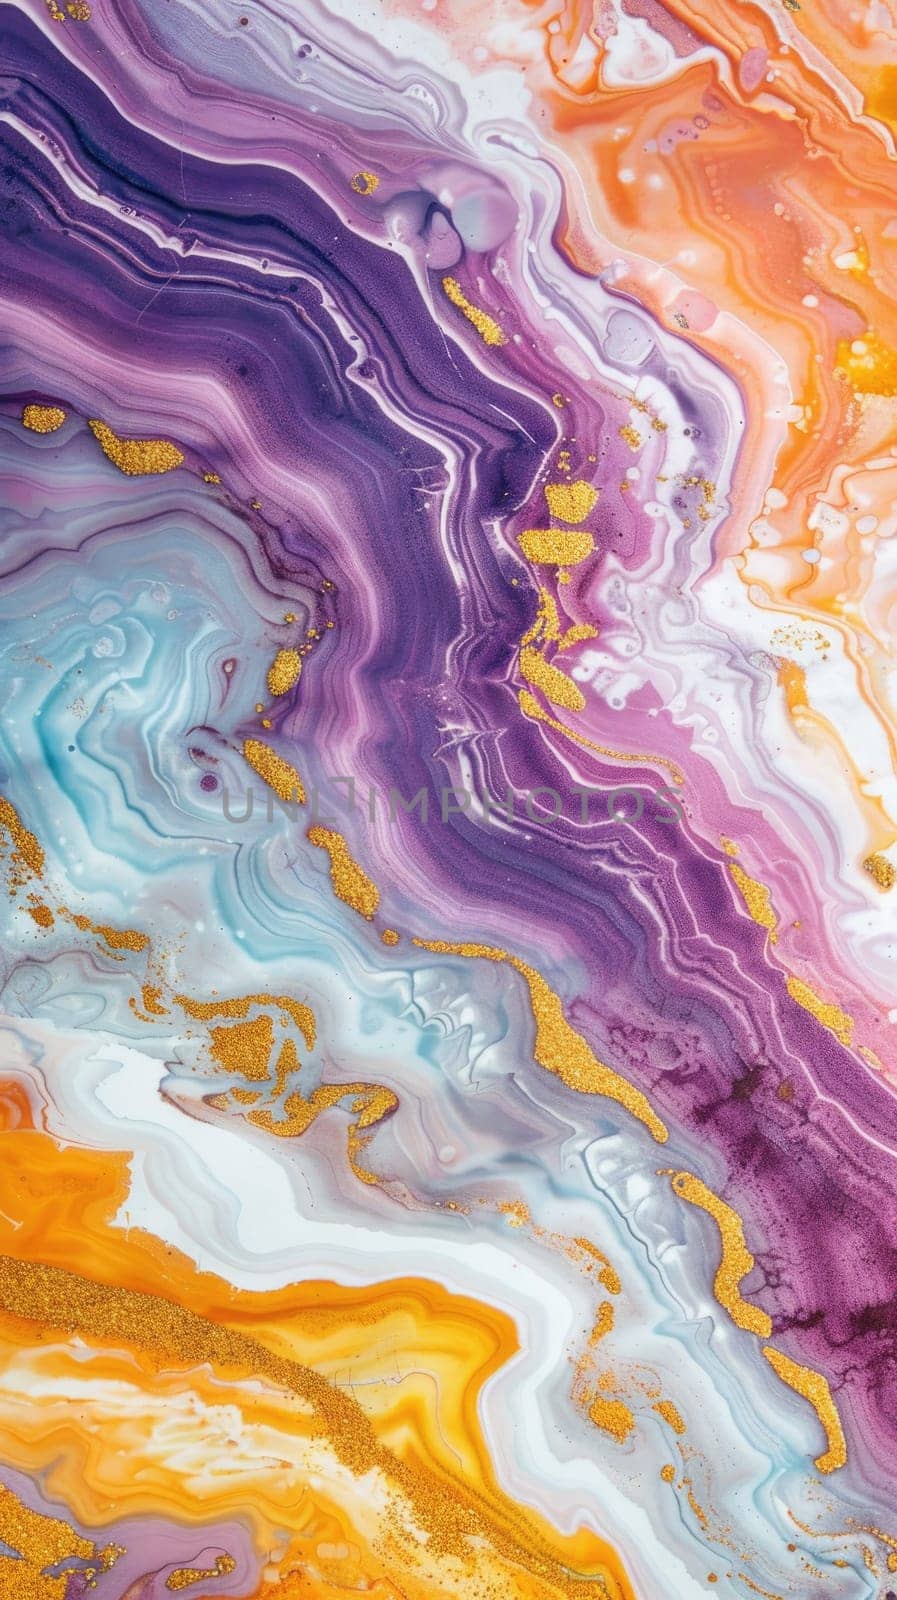 marble pattern background color purple orange yellow blue and white luxury